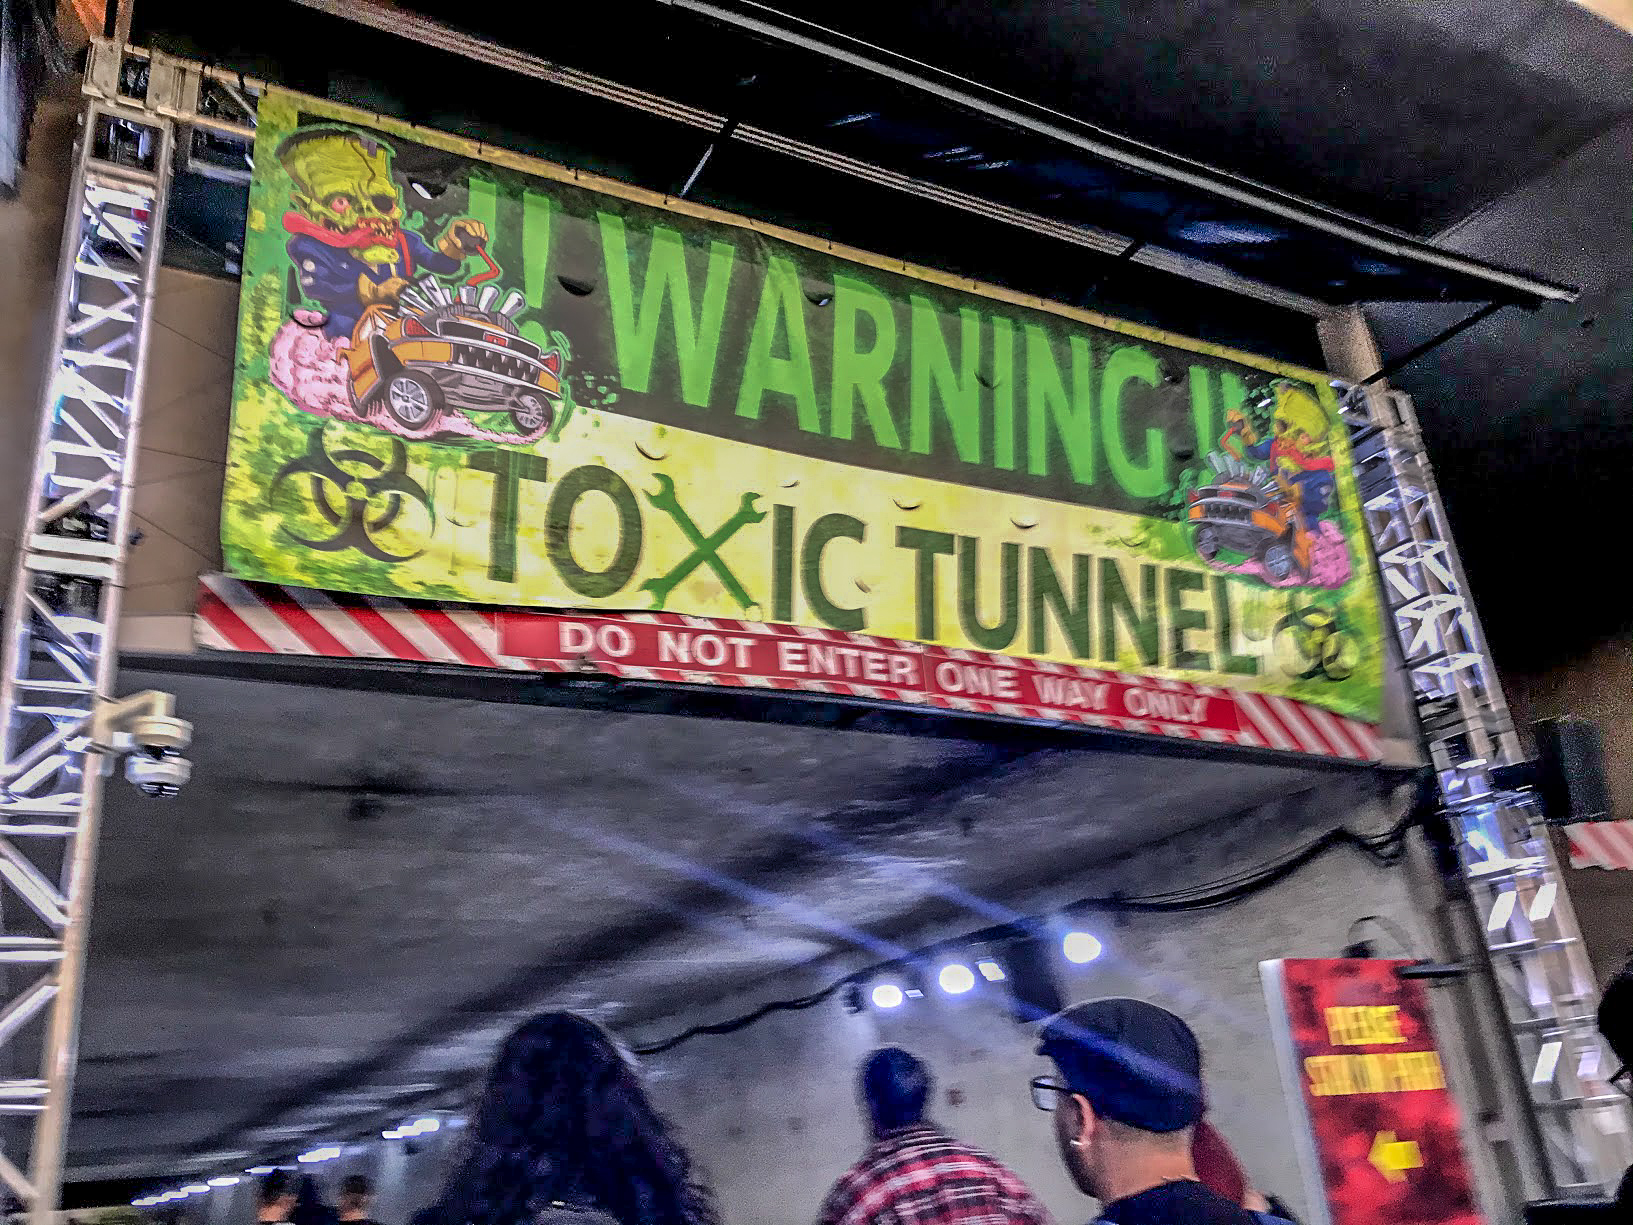 A blurry picture of the toxic tunnel sign